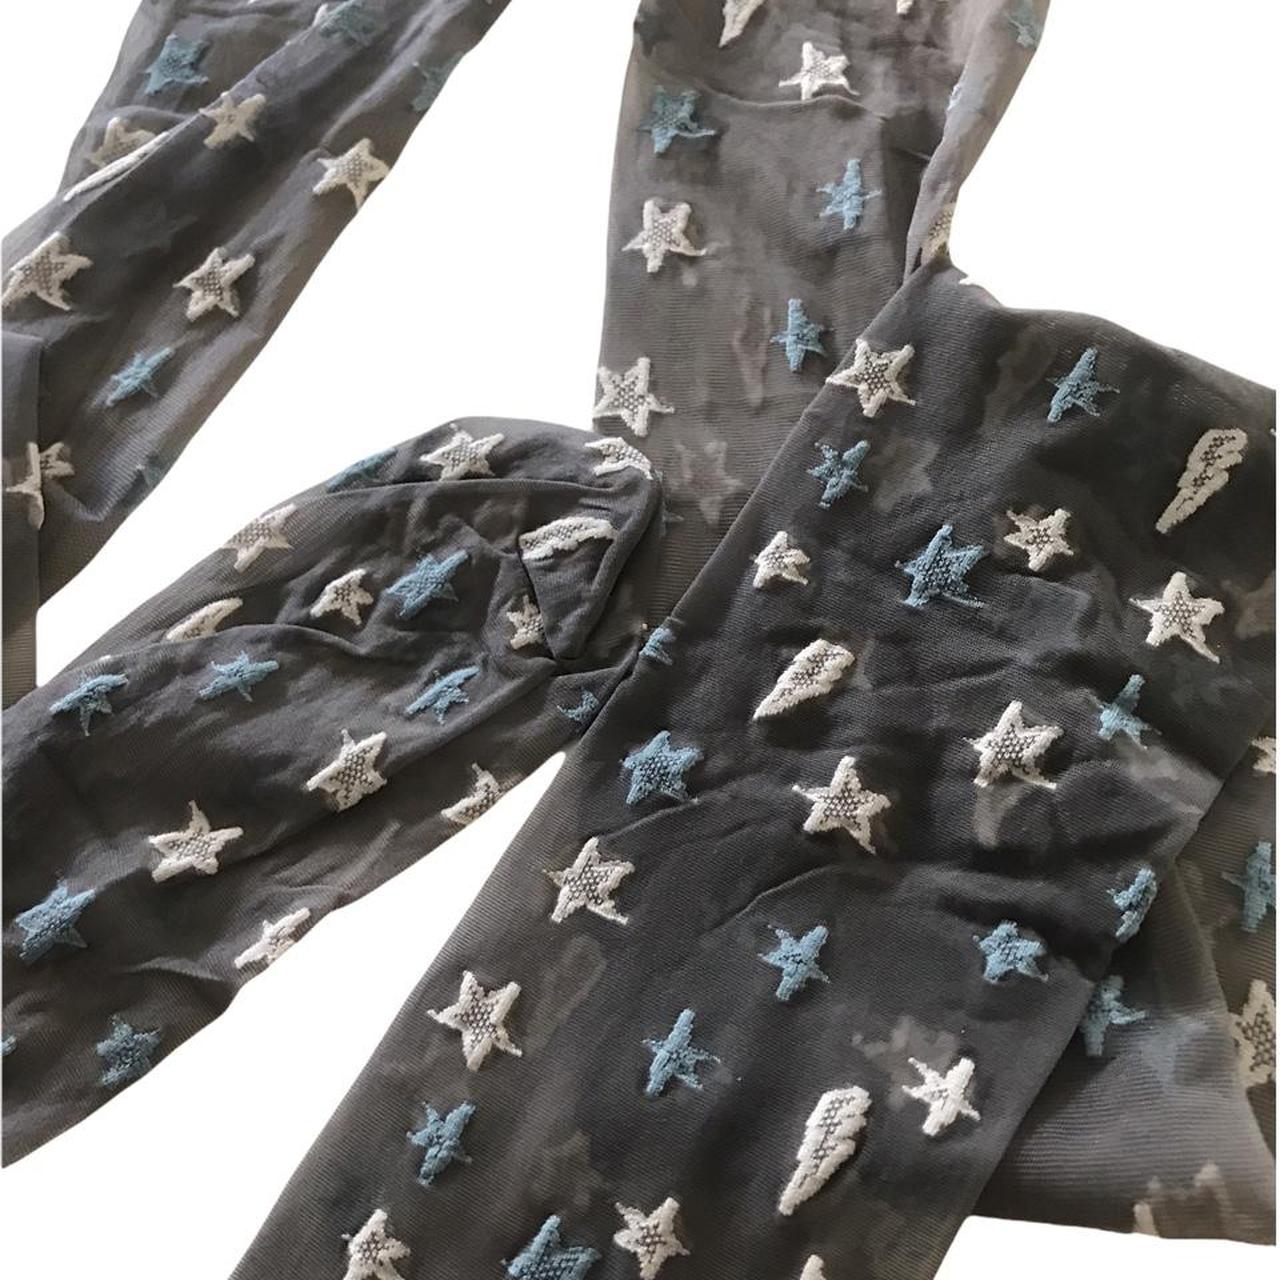 Product Image 3 - Anna Sui star tights
Grey tights